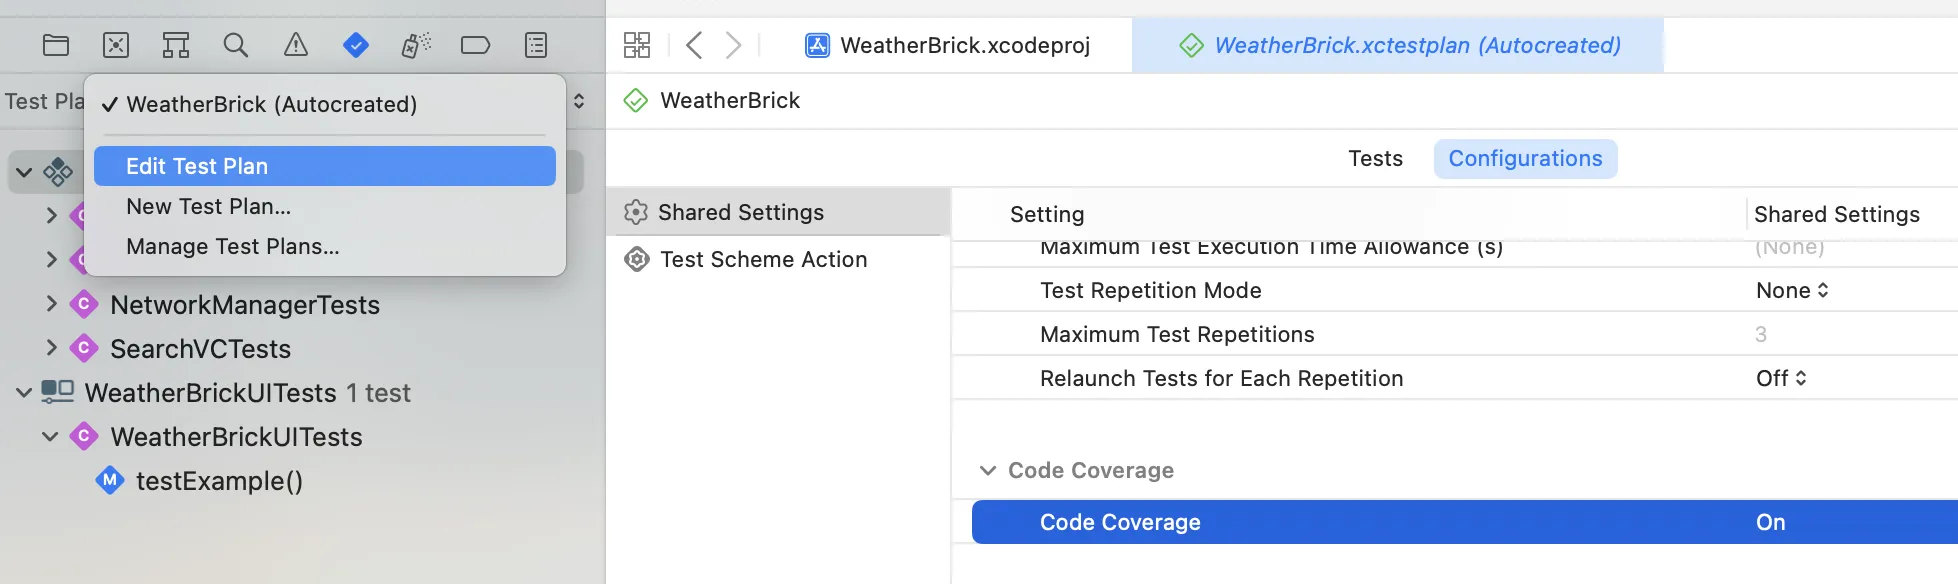 Code coverage in the Test plan